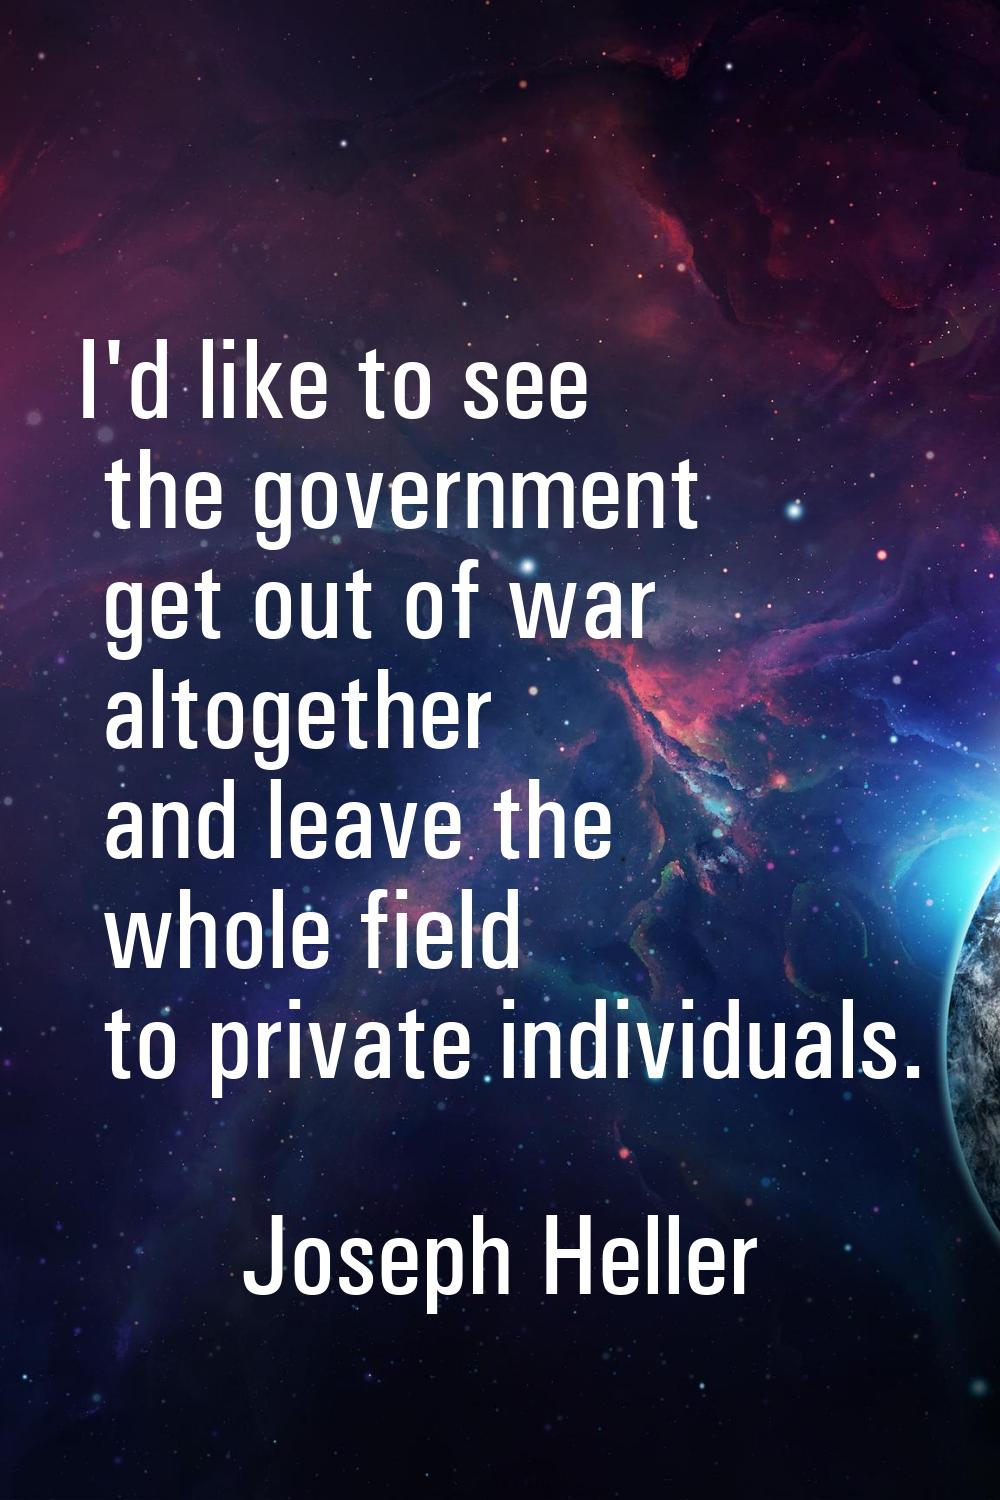 I'd like to see the government get out of war altogether and leave the whole field to private indiv